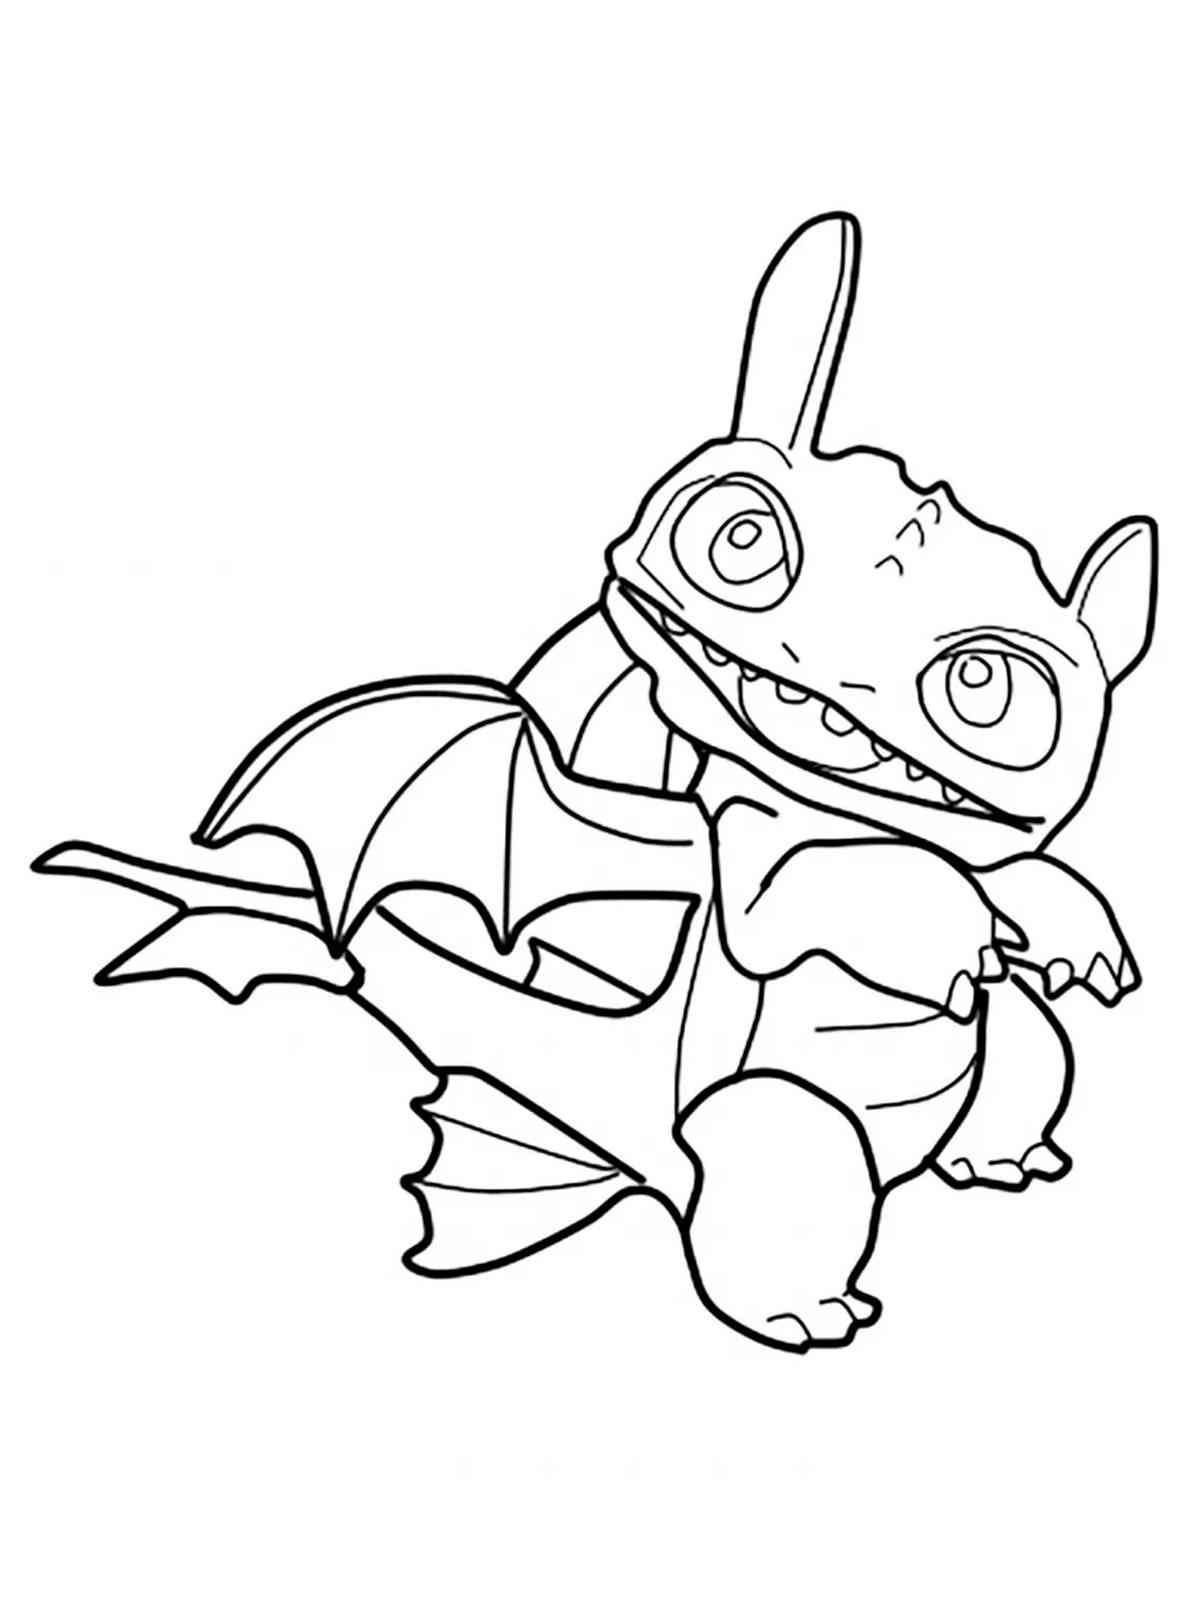 How To Train Your Dragon 7 coloring page